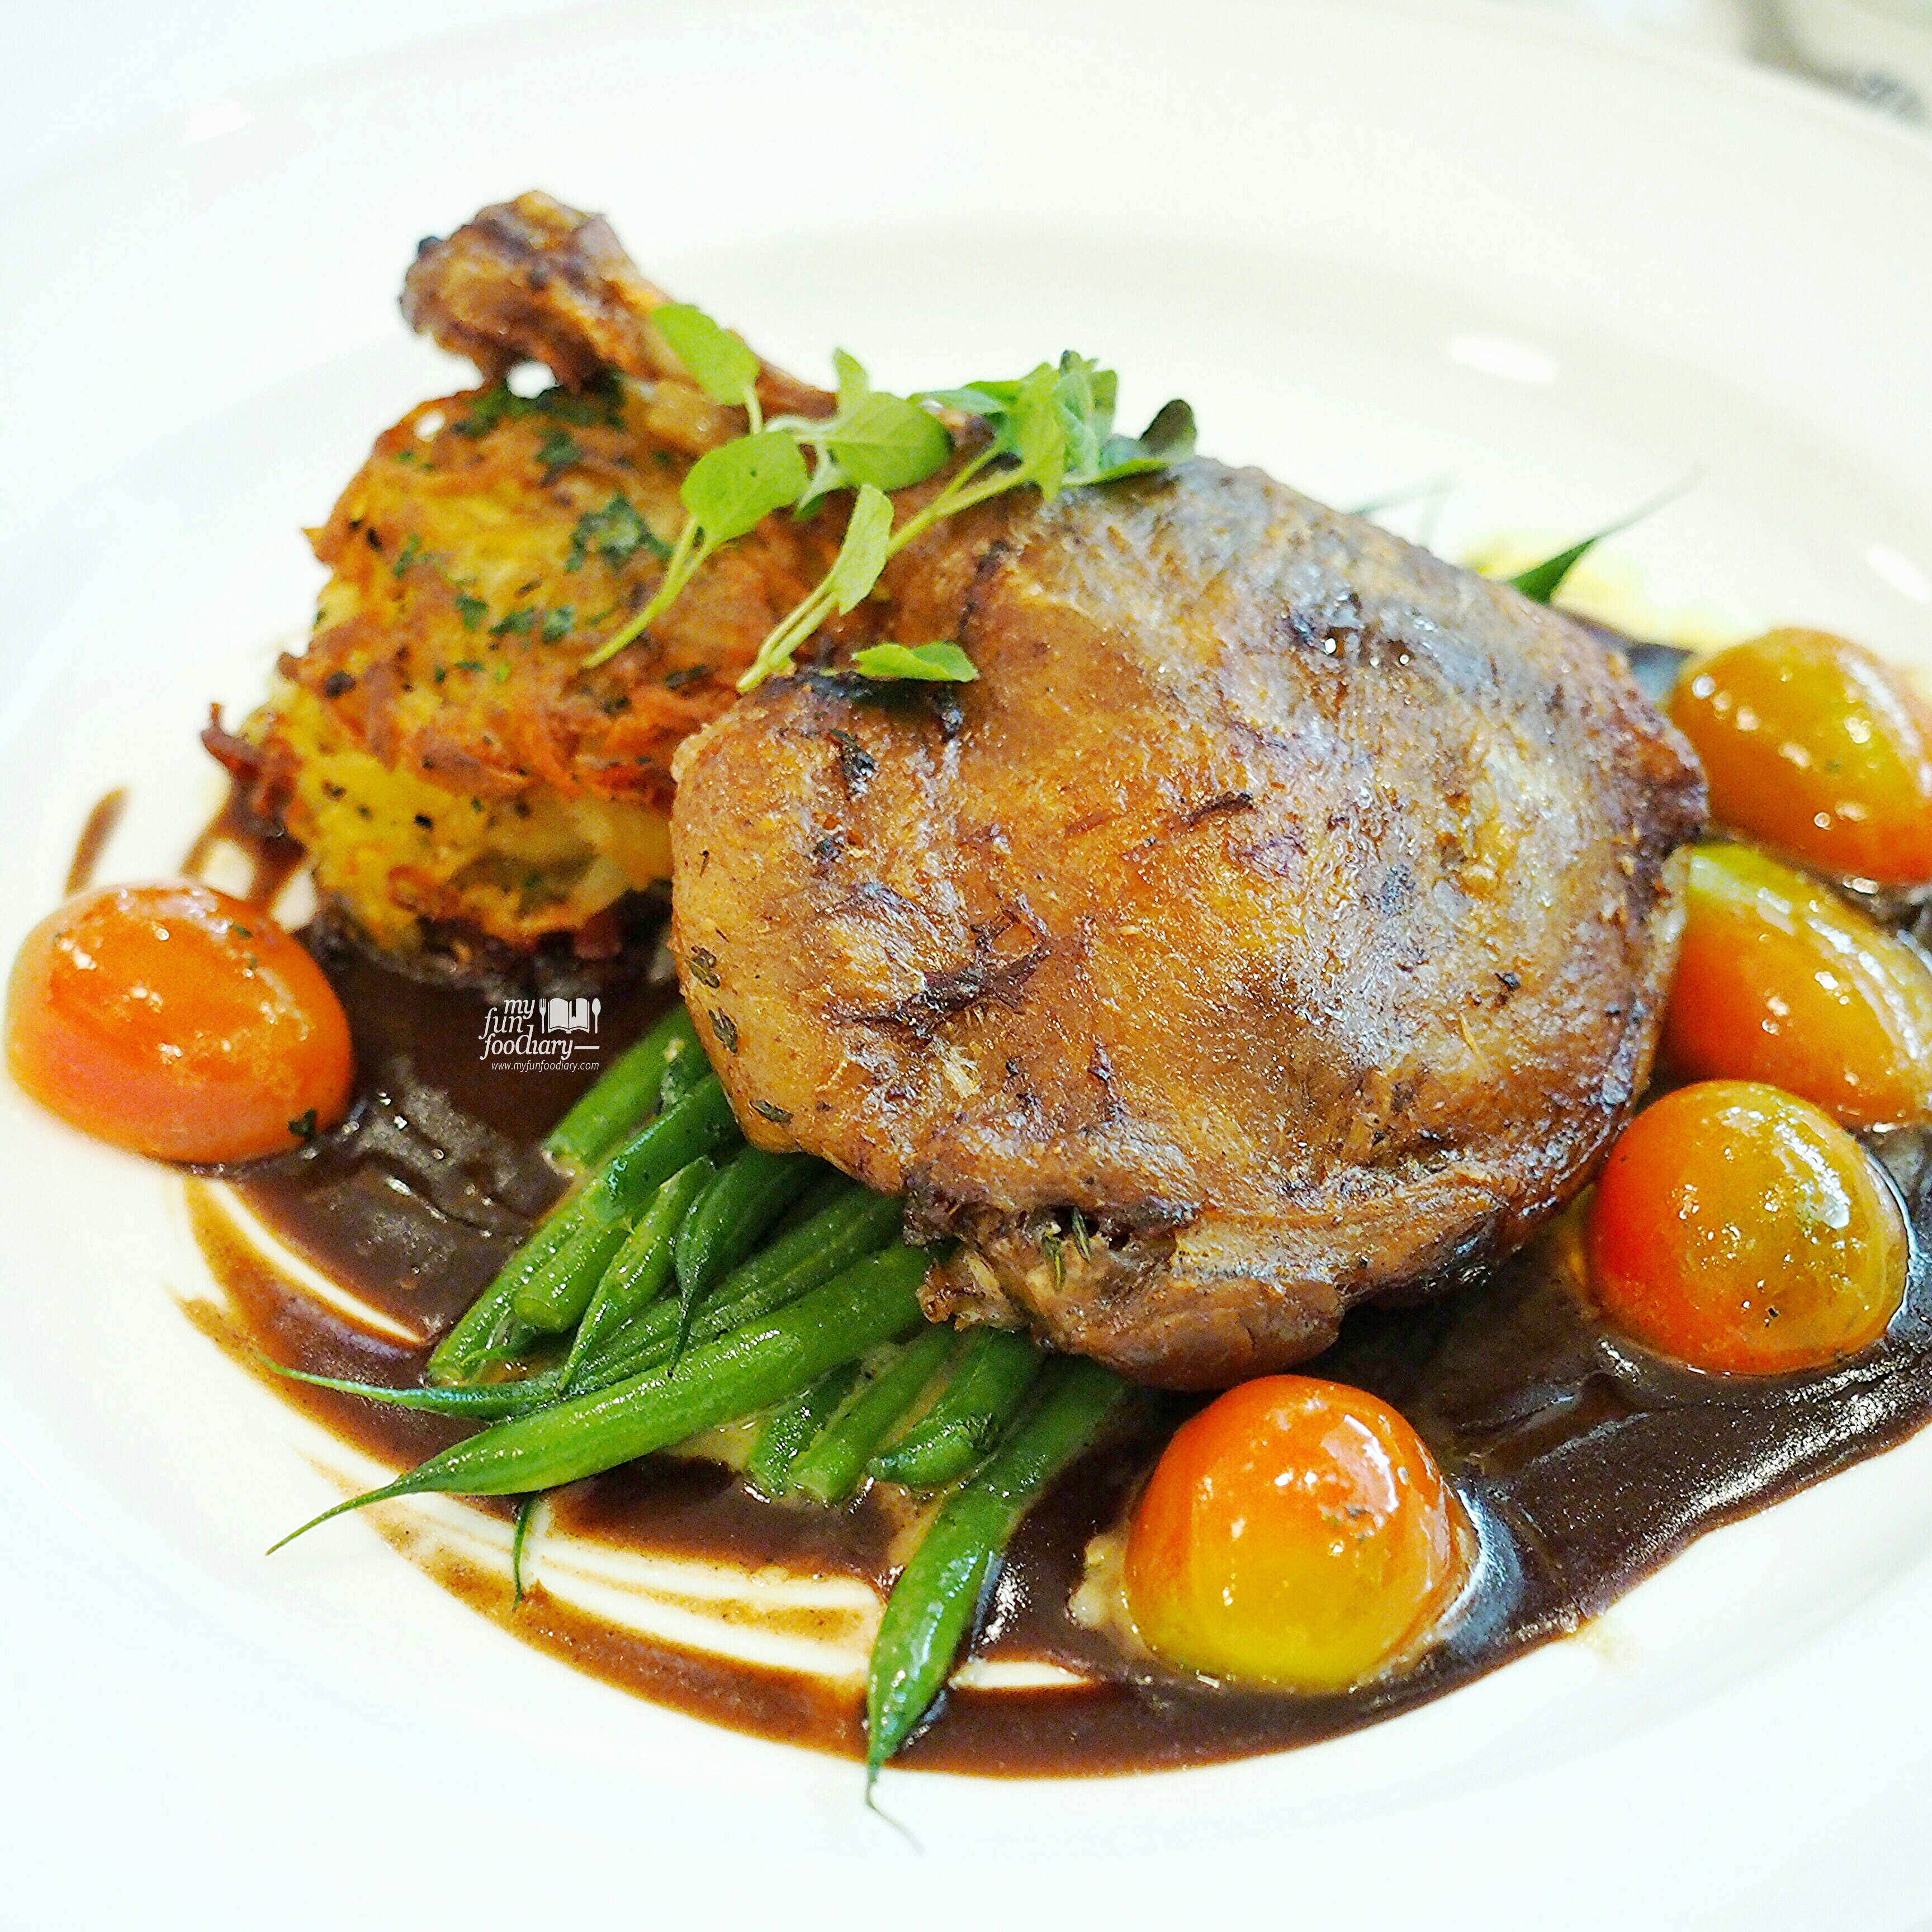 Confit De Canard at Bistro Baron by Myfunfoodiary 02